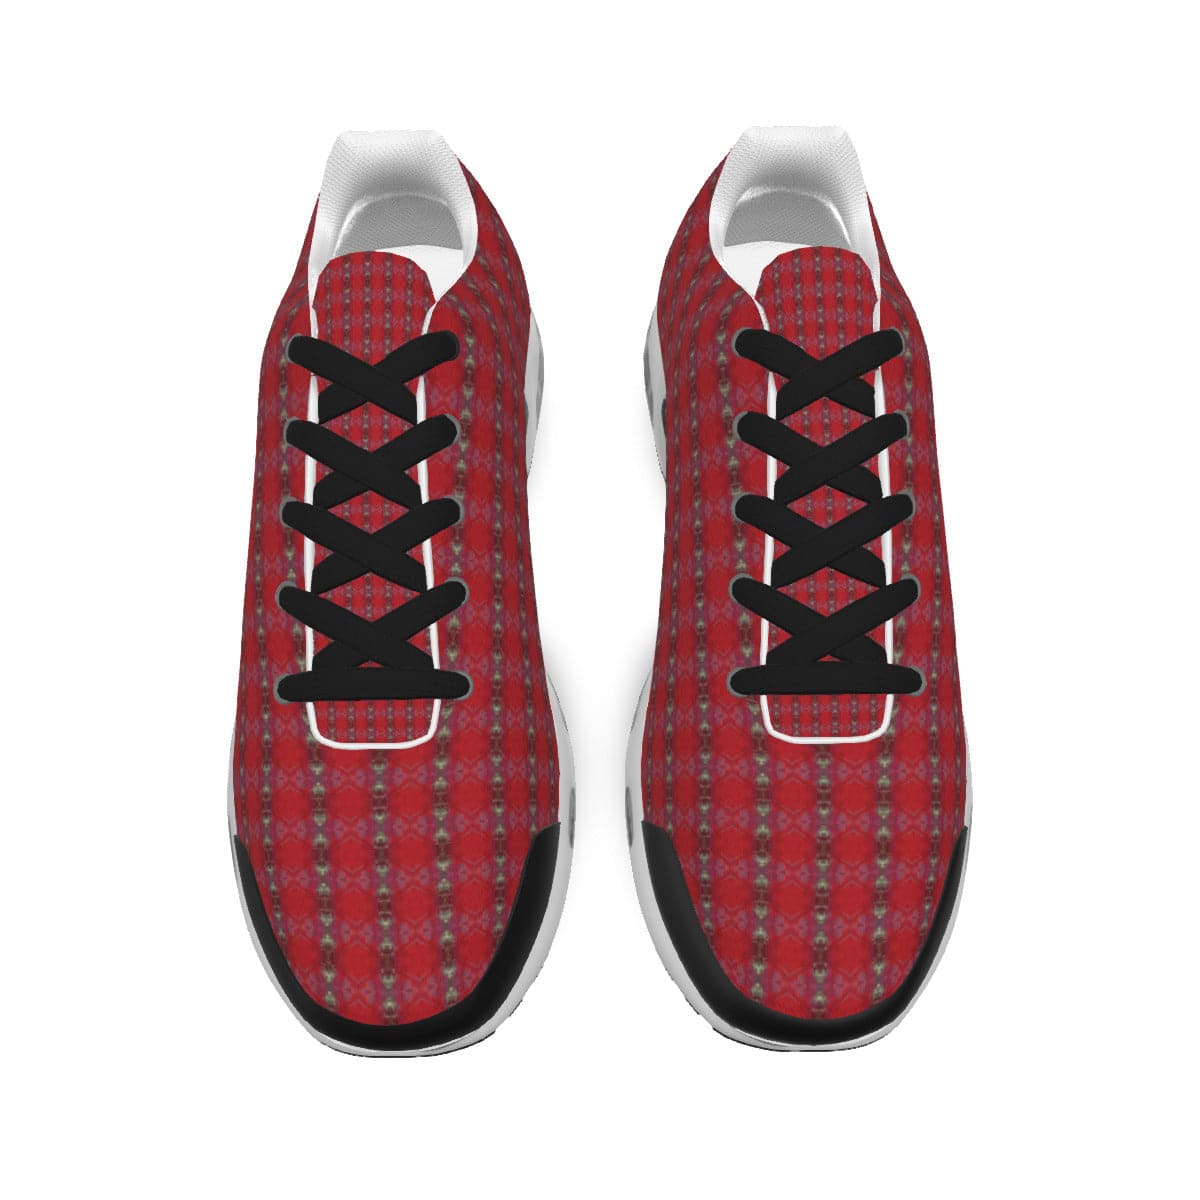 Wine Red and Olive green patterned Stylish Men's Air Cushion Sports Shoes, by Sensus Studio Design